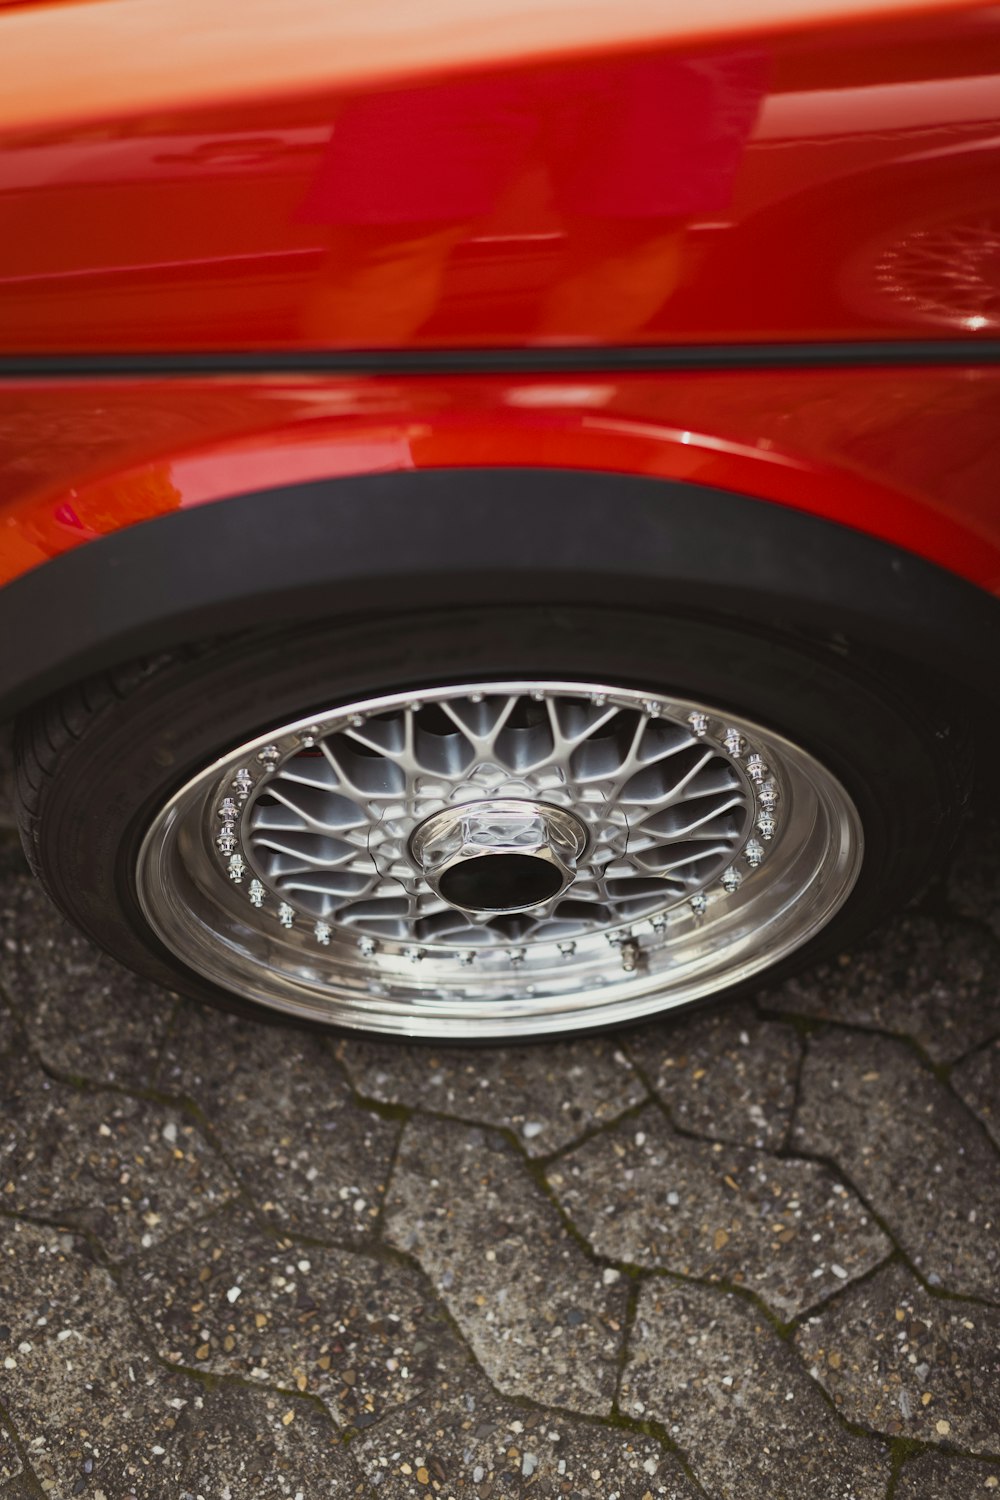 a close up of a tire on a red car